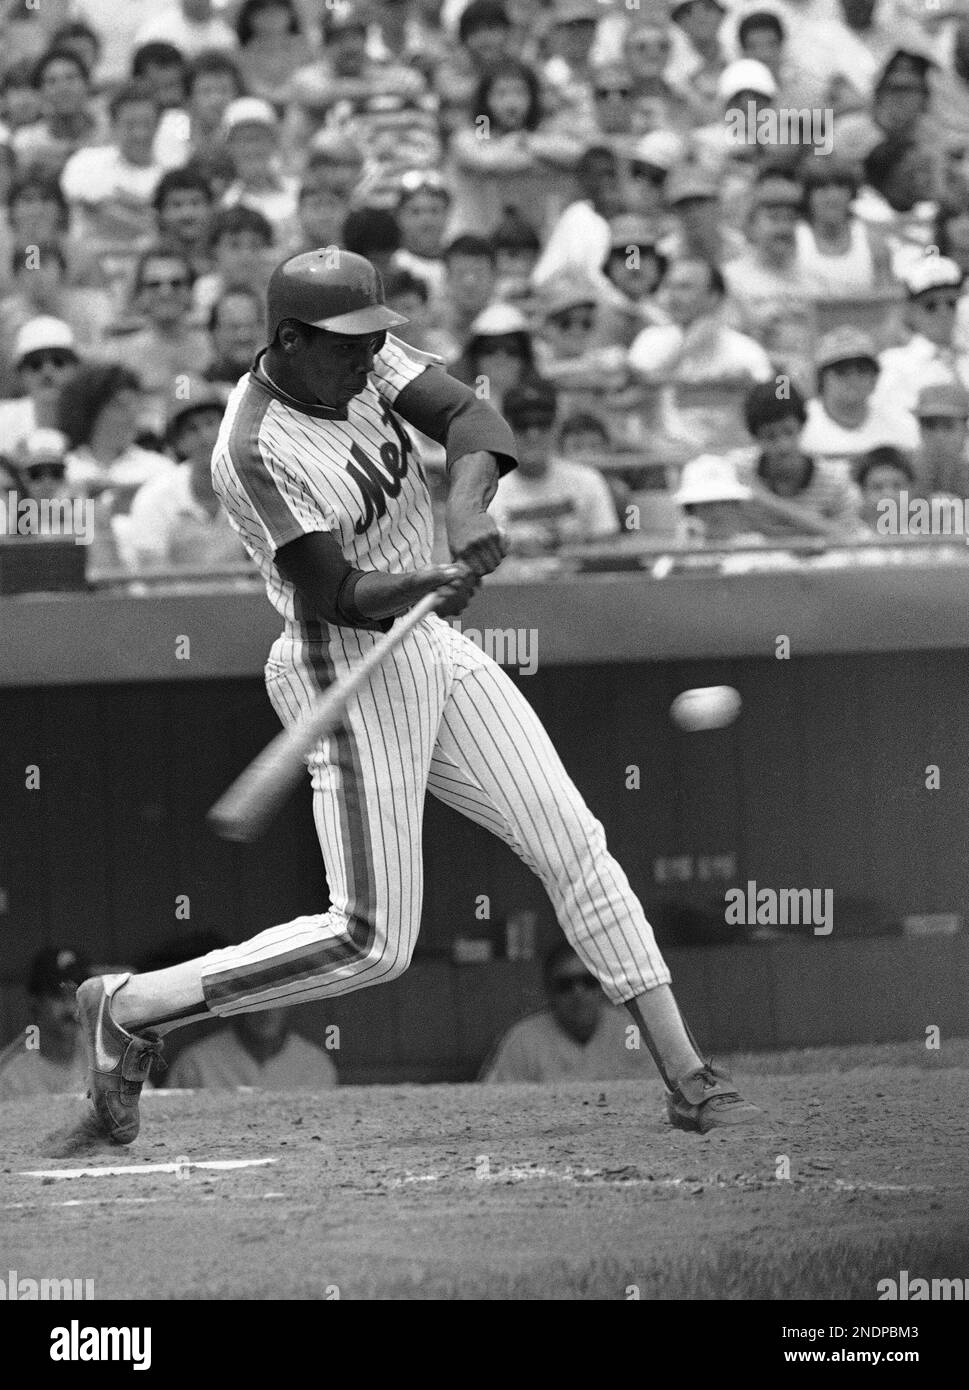 New York Mets Dwight Gooden eyes a pitch before getting a single